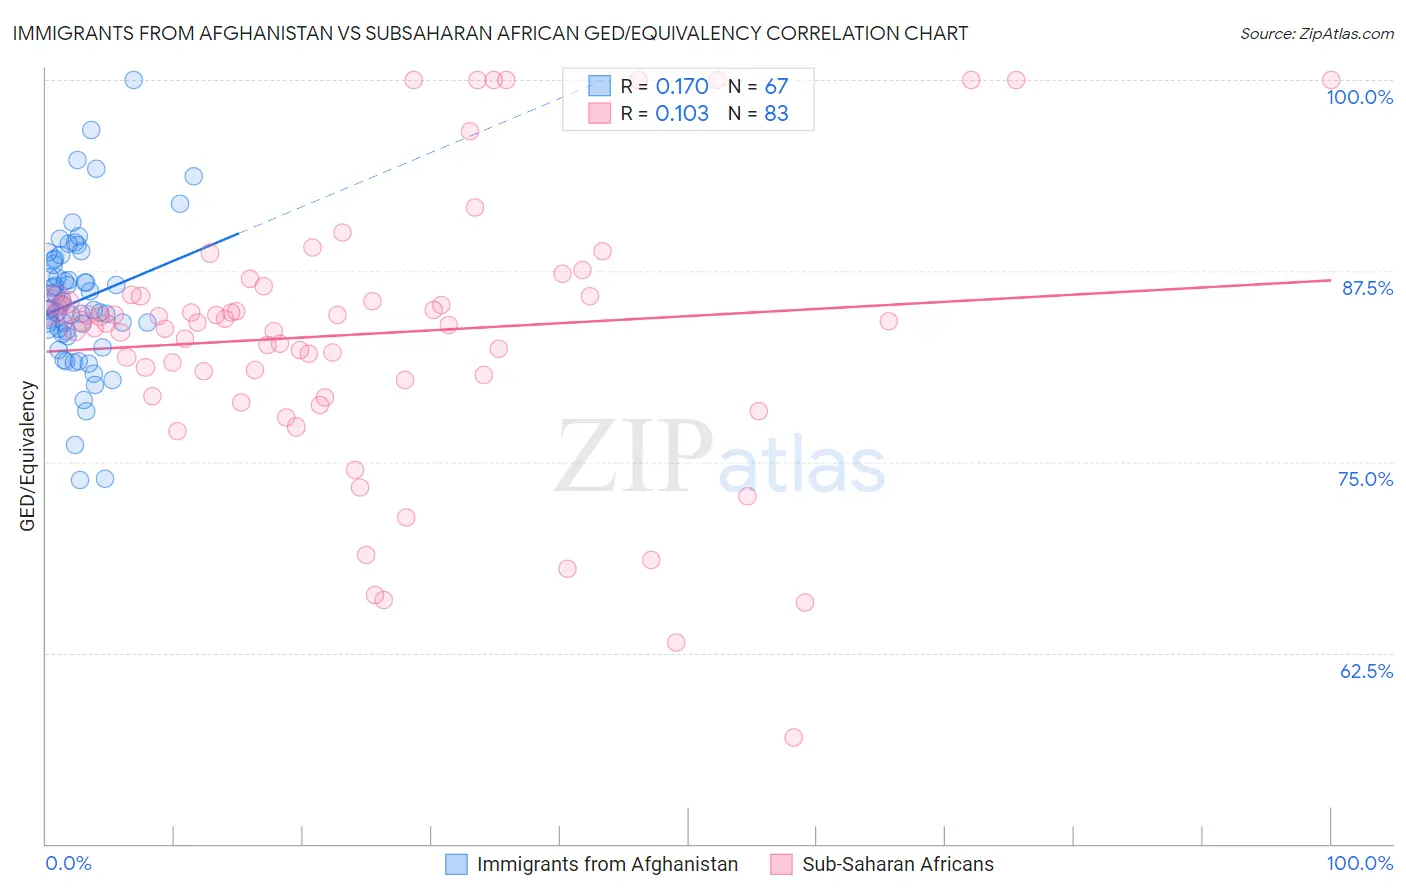 Immigrants from Afghanistan vs Subsaharan African GED/Equivalency